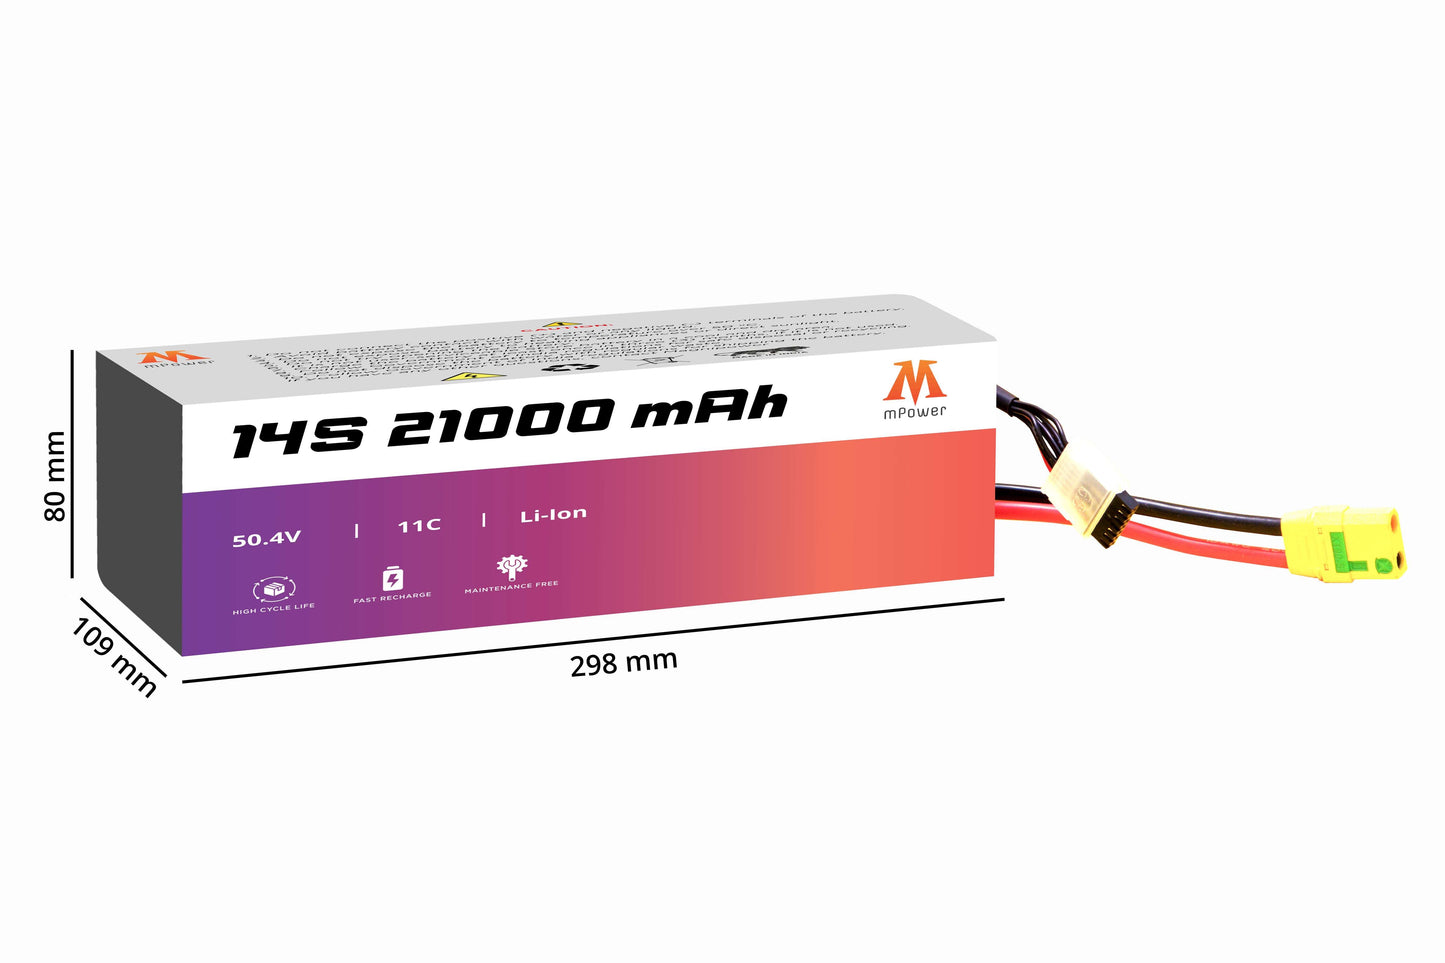 mPower 14S 21000mAh Lithium-Ion Battery for Survey Drones